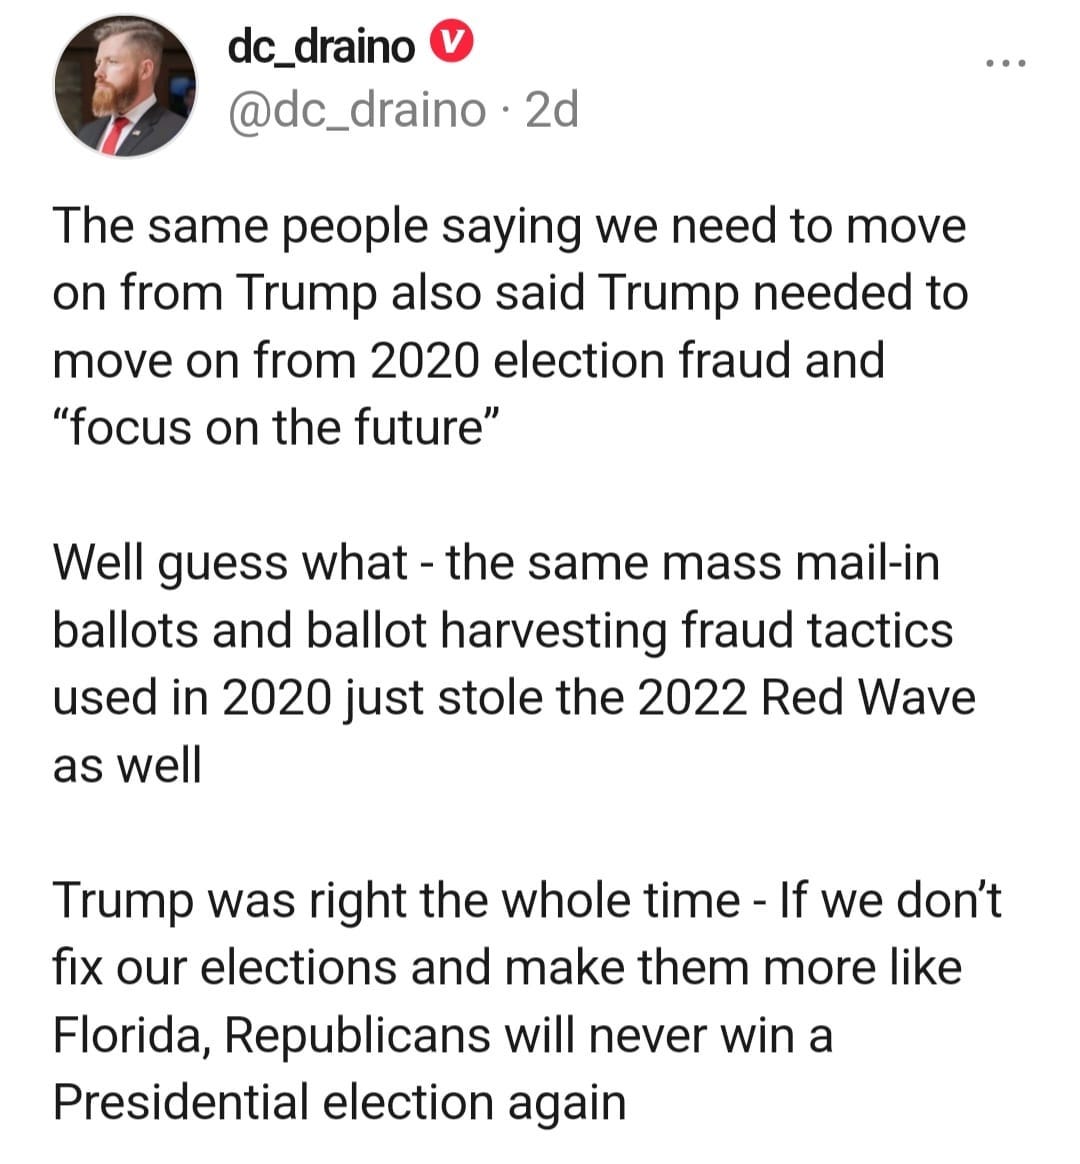 May be an image of 1 person and text that says 'dc_draino @dc_draino 2d The same people saying we need to move on from Trump also said Trump needed to move on from 2020 election fraud and "focus on the future" Well guess what- the same mass mail-in ballots and ballot harvesting fraud tactics used in 2020 just stole the 2022 Red Wave as well Trump was right the whole time If we don't fix our elections and make them more like Florida Republicans will never win a Presidential election again'